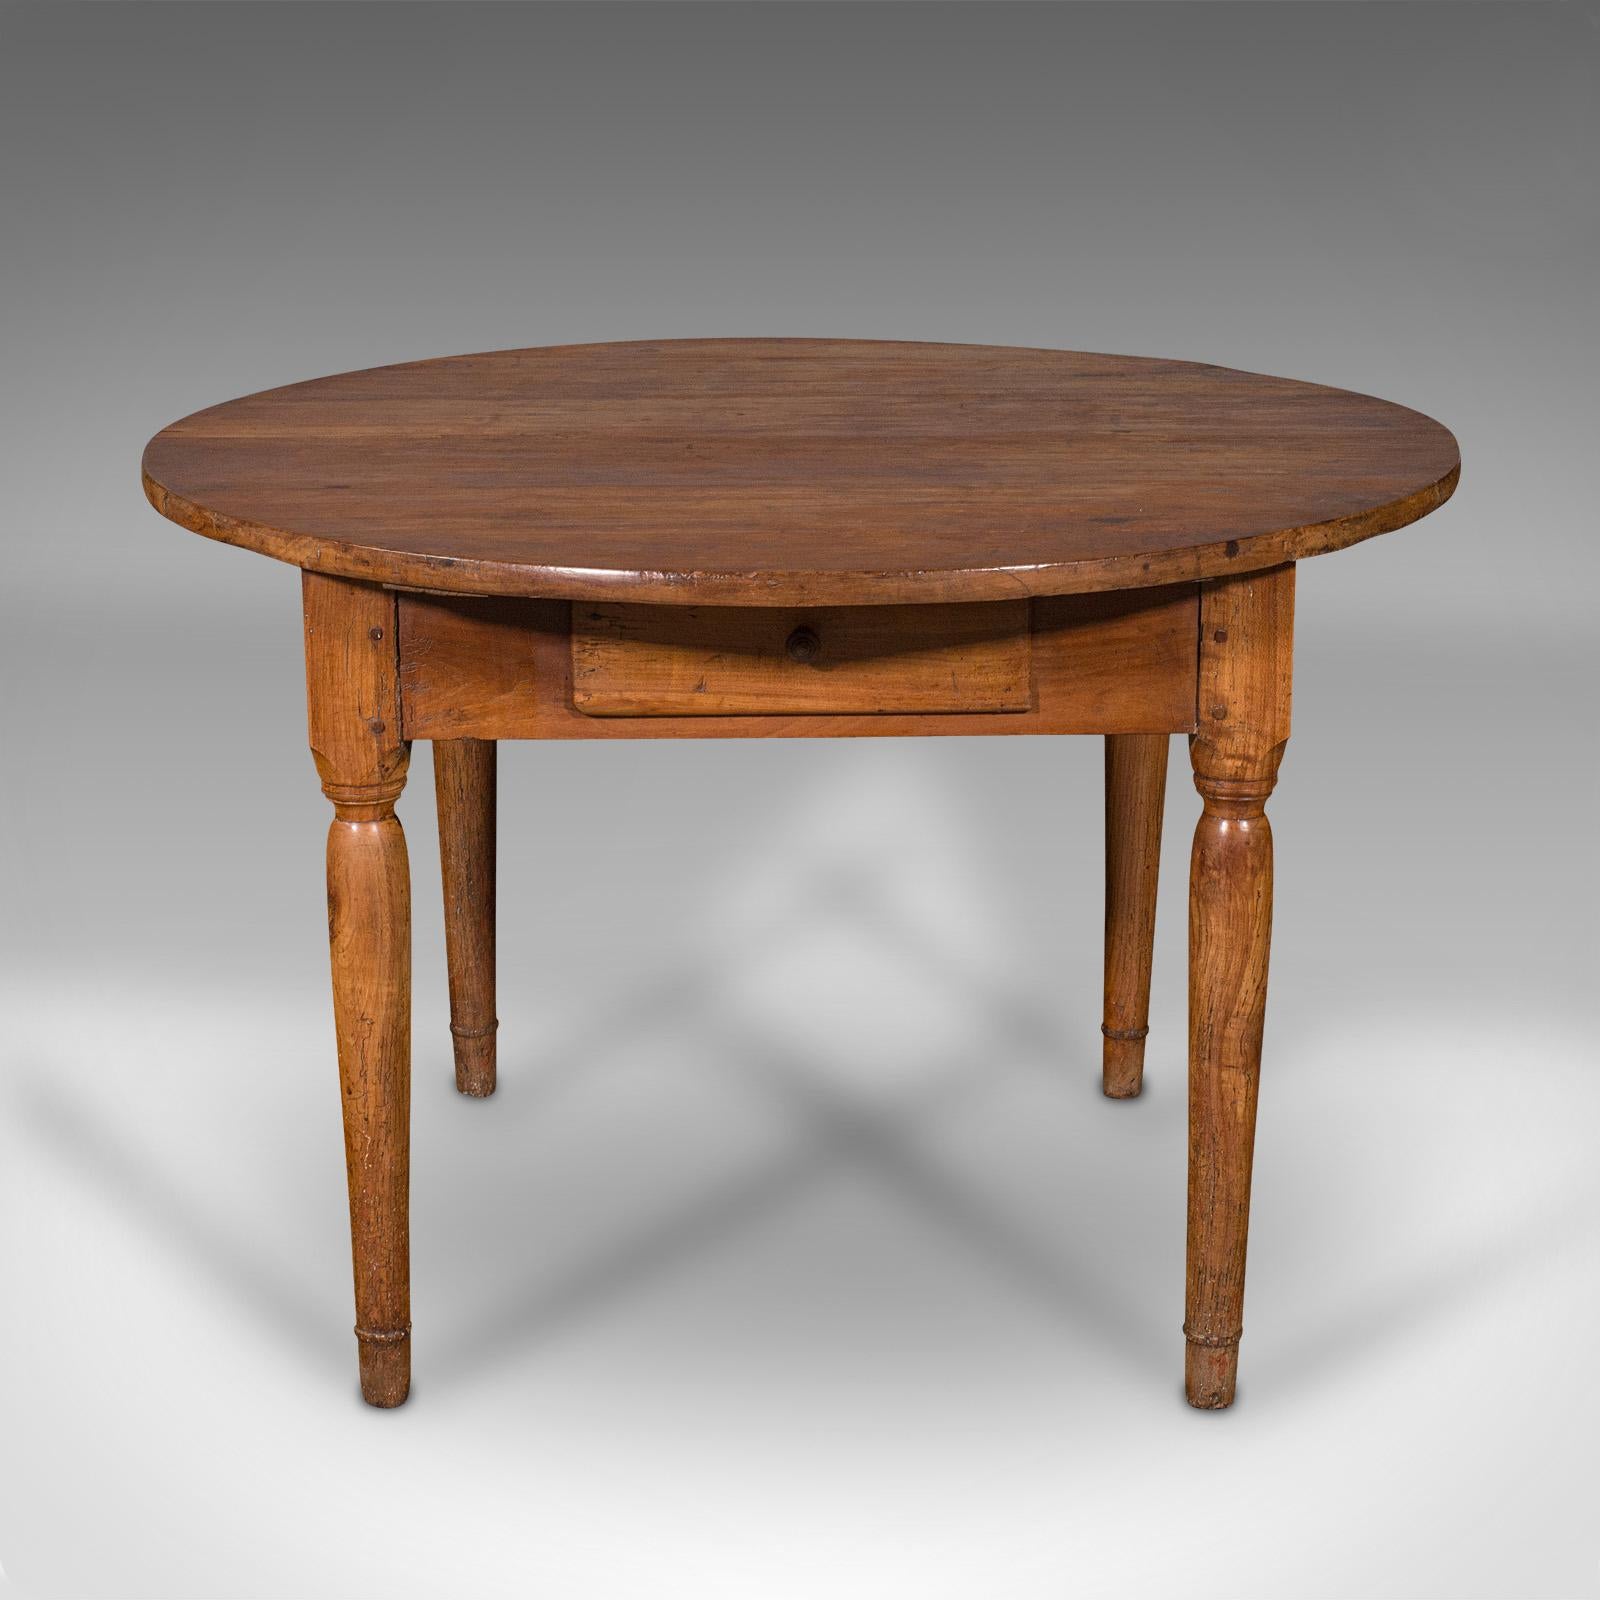 This is an antique Provençal baker's table. A French, fruitwood 4-seat kitchen or boulangerie table, dating to the late Victorian period, circa 1880.

Graced with a delightful patination, a treat for the townhouse or rustic chateau alike
Displays